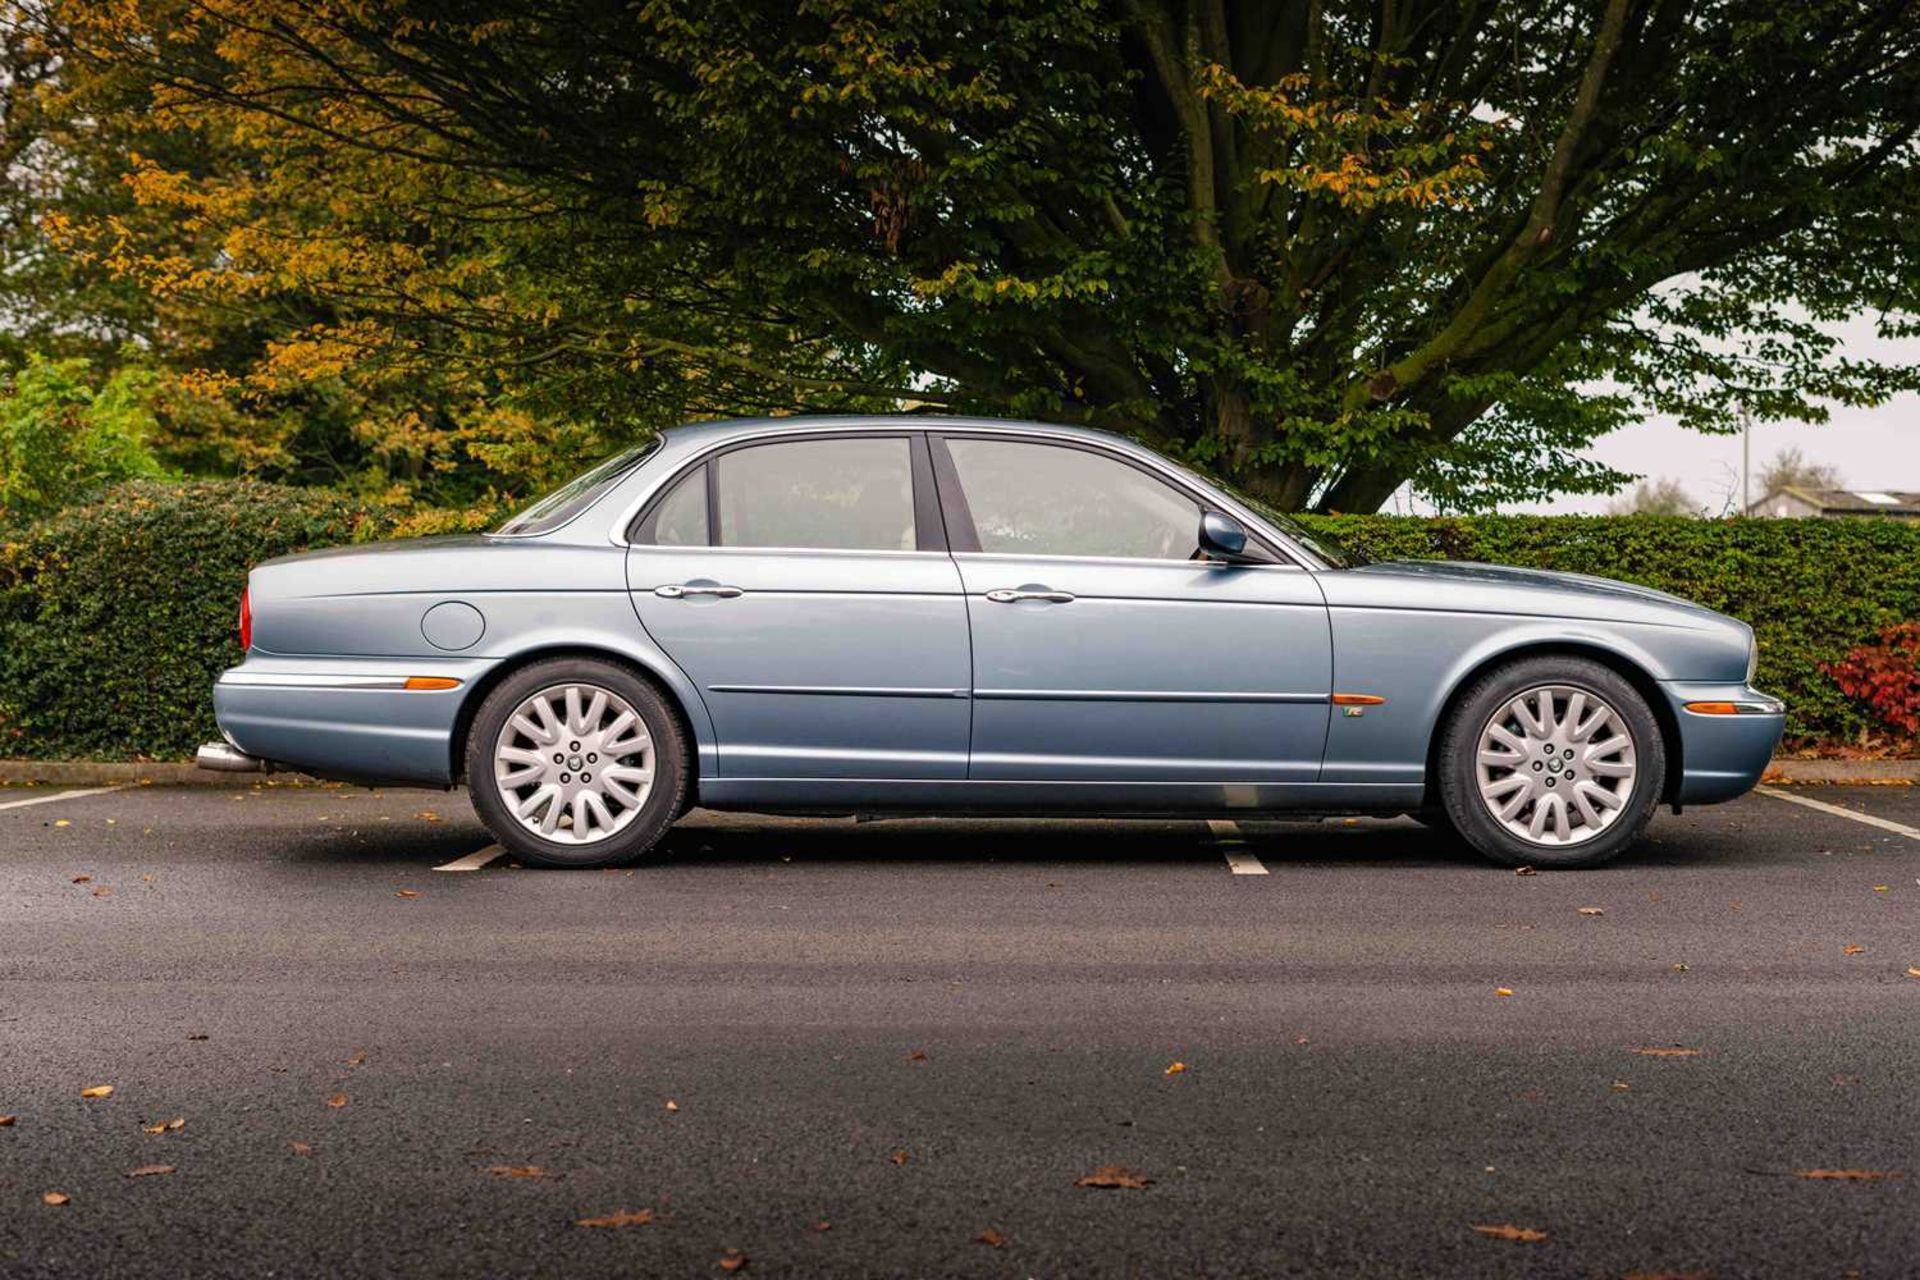 2003 Jaguar XJ8 4.2 V8 SE Range-topping 'Special Equipment' model, with a current MOT and warranted  - Image 12 of 63